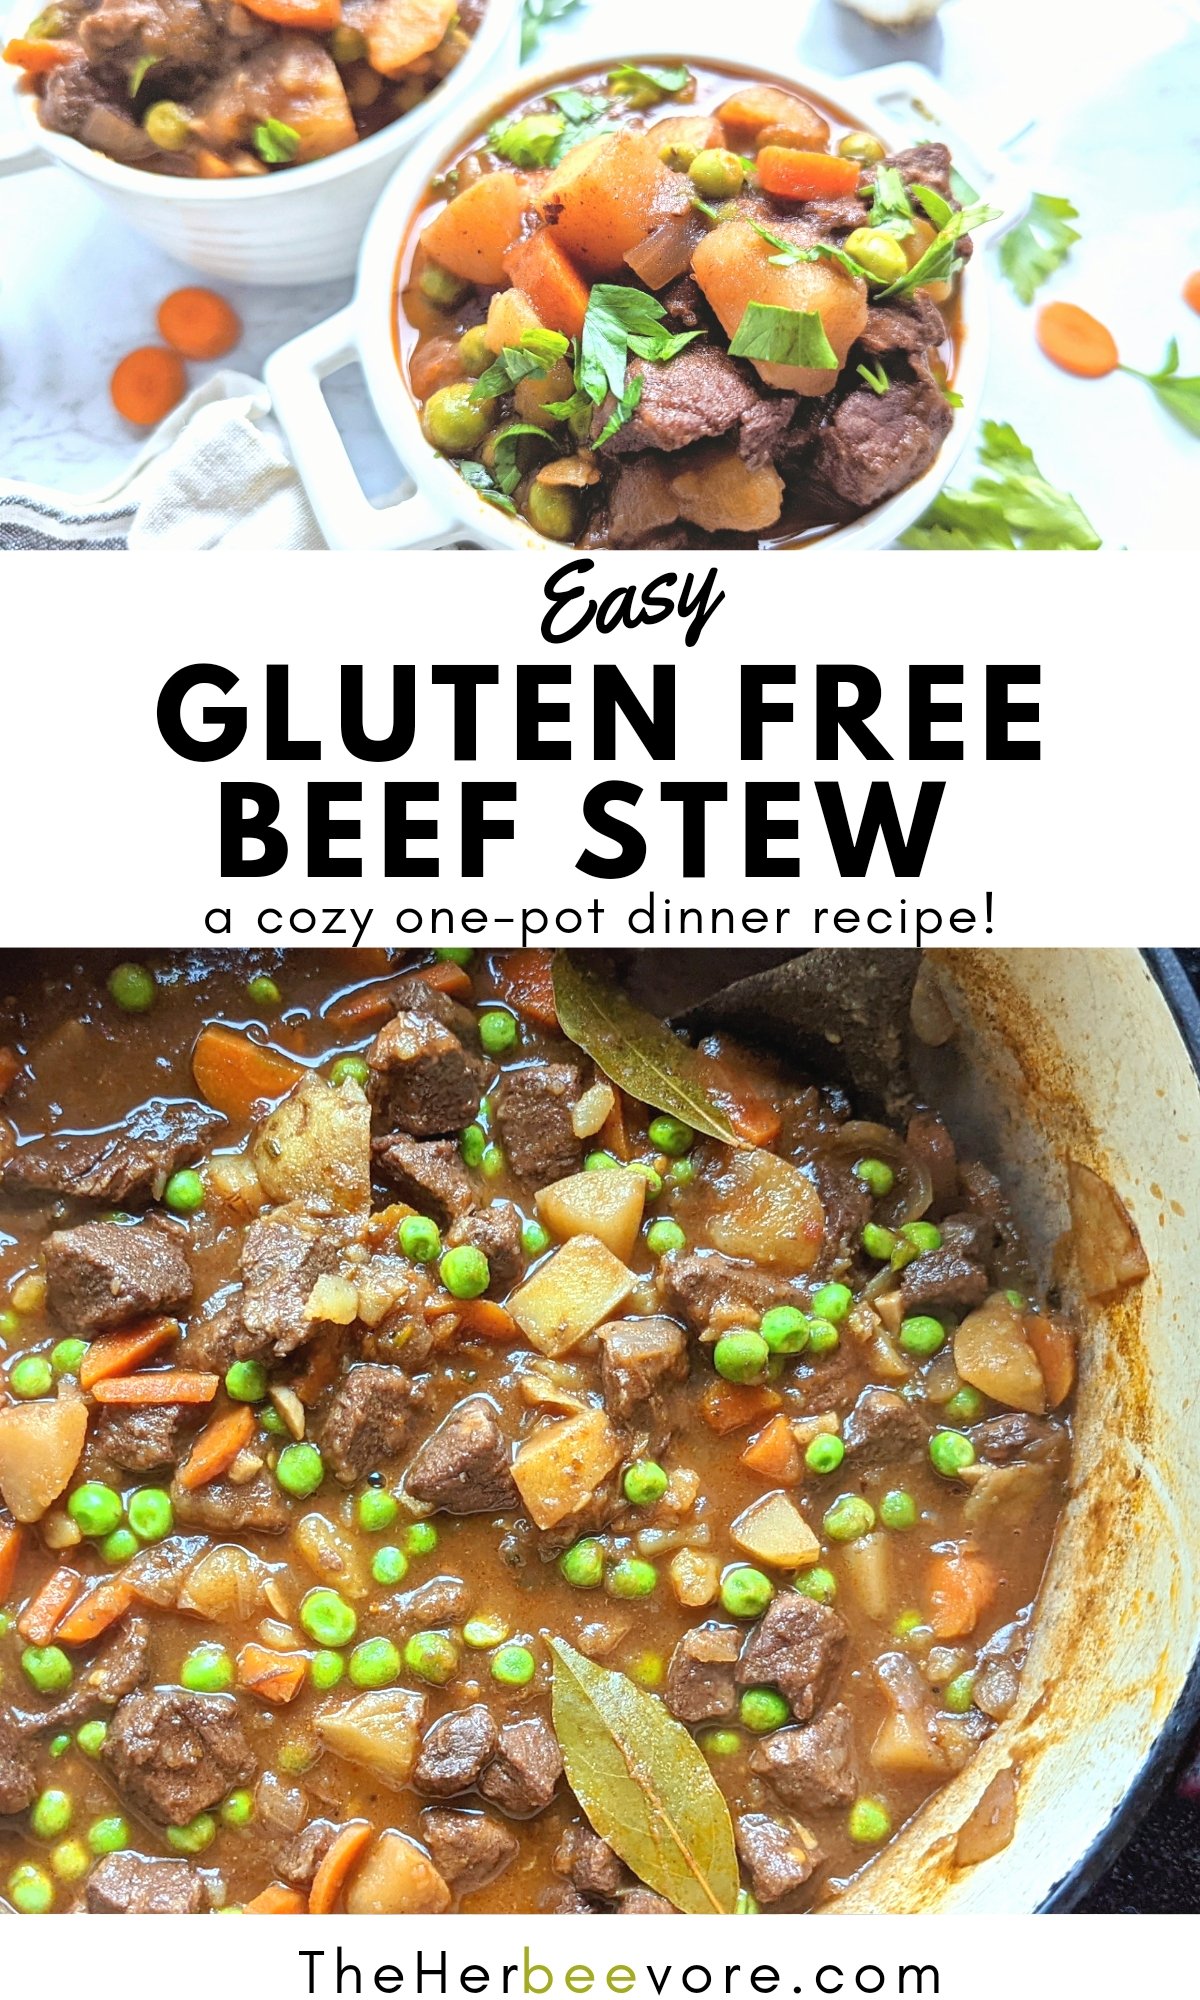 gluten free beef stew recipe no wheat recipes for dinner easy healthy dinner ideas with beef for fall or winter